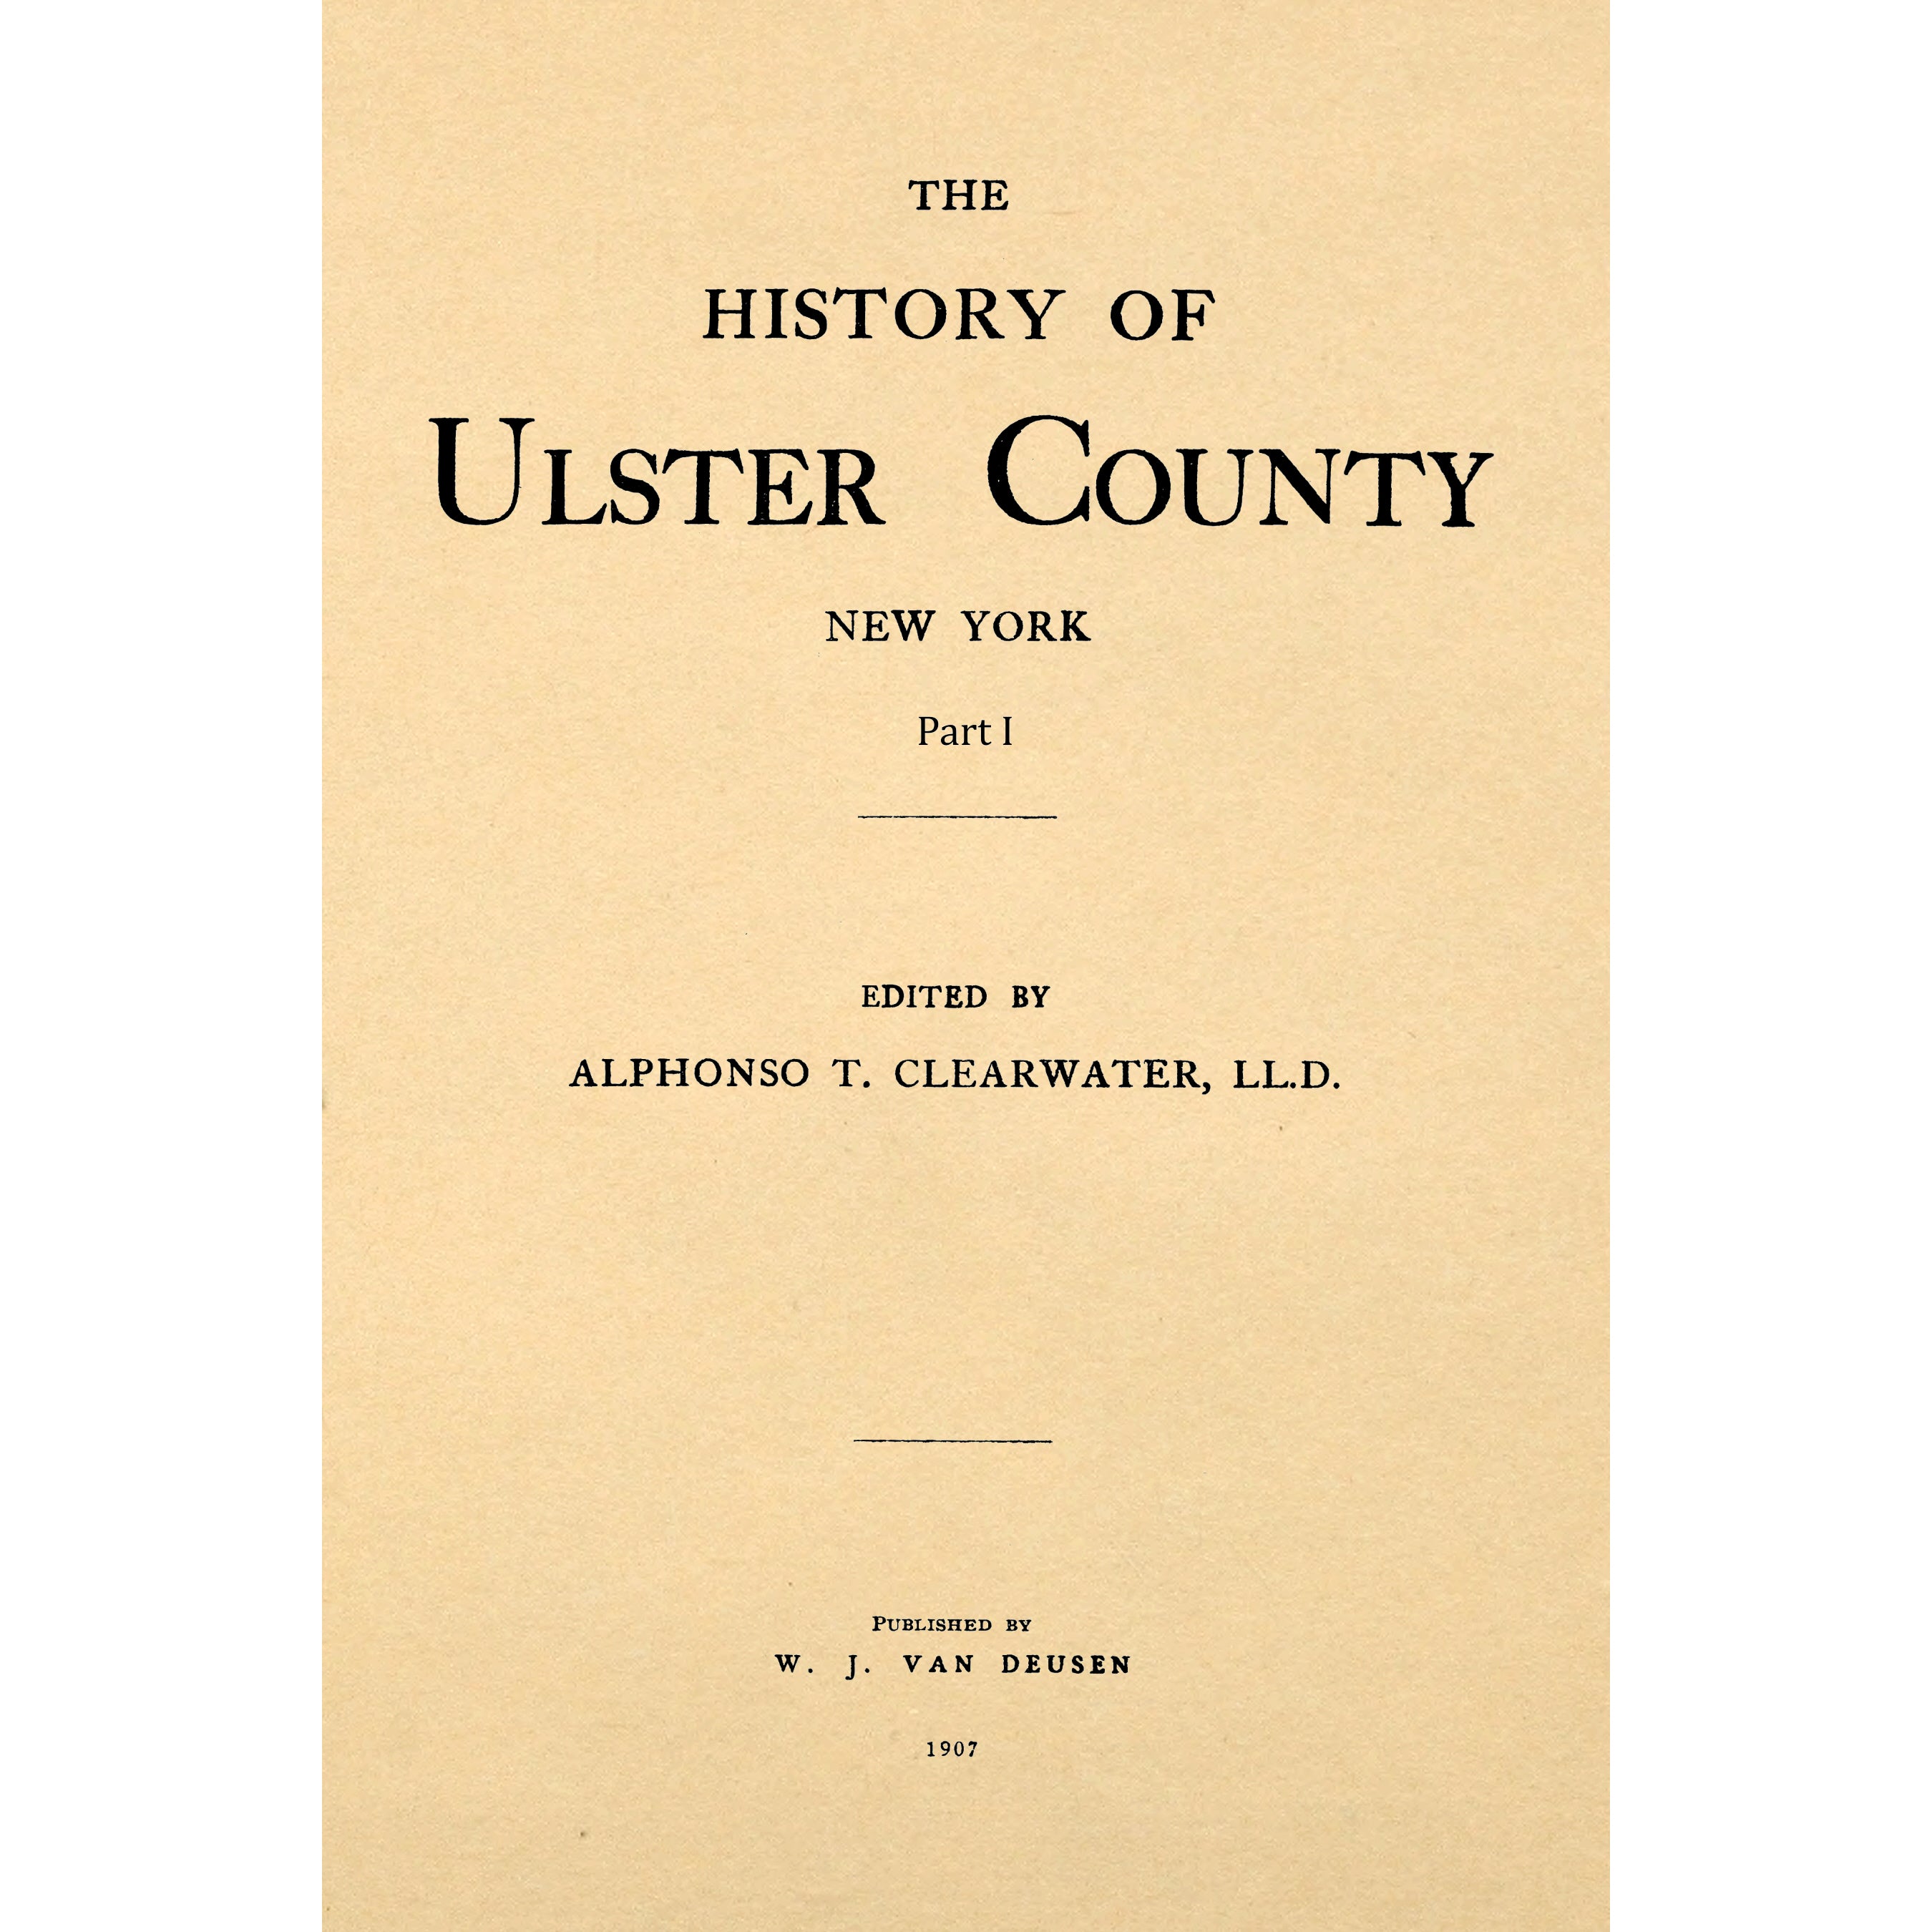 The history of Ulster County, New York